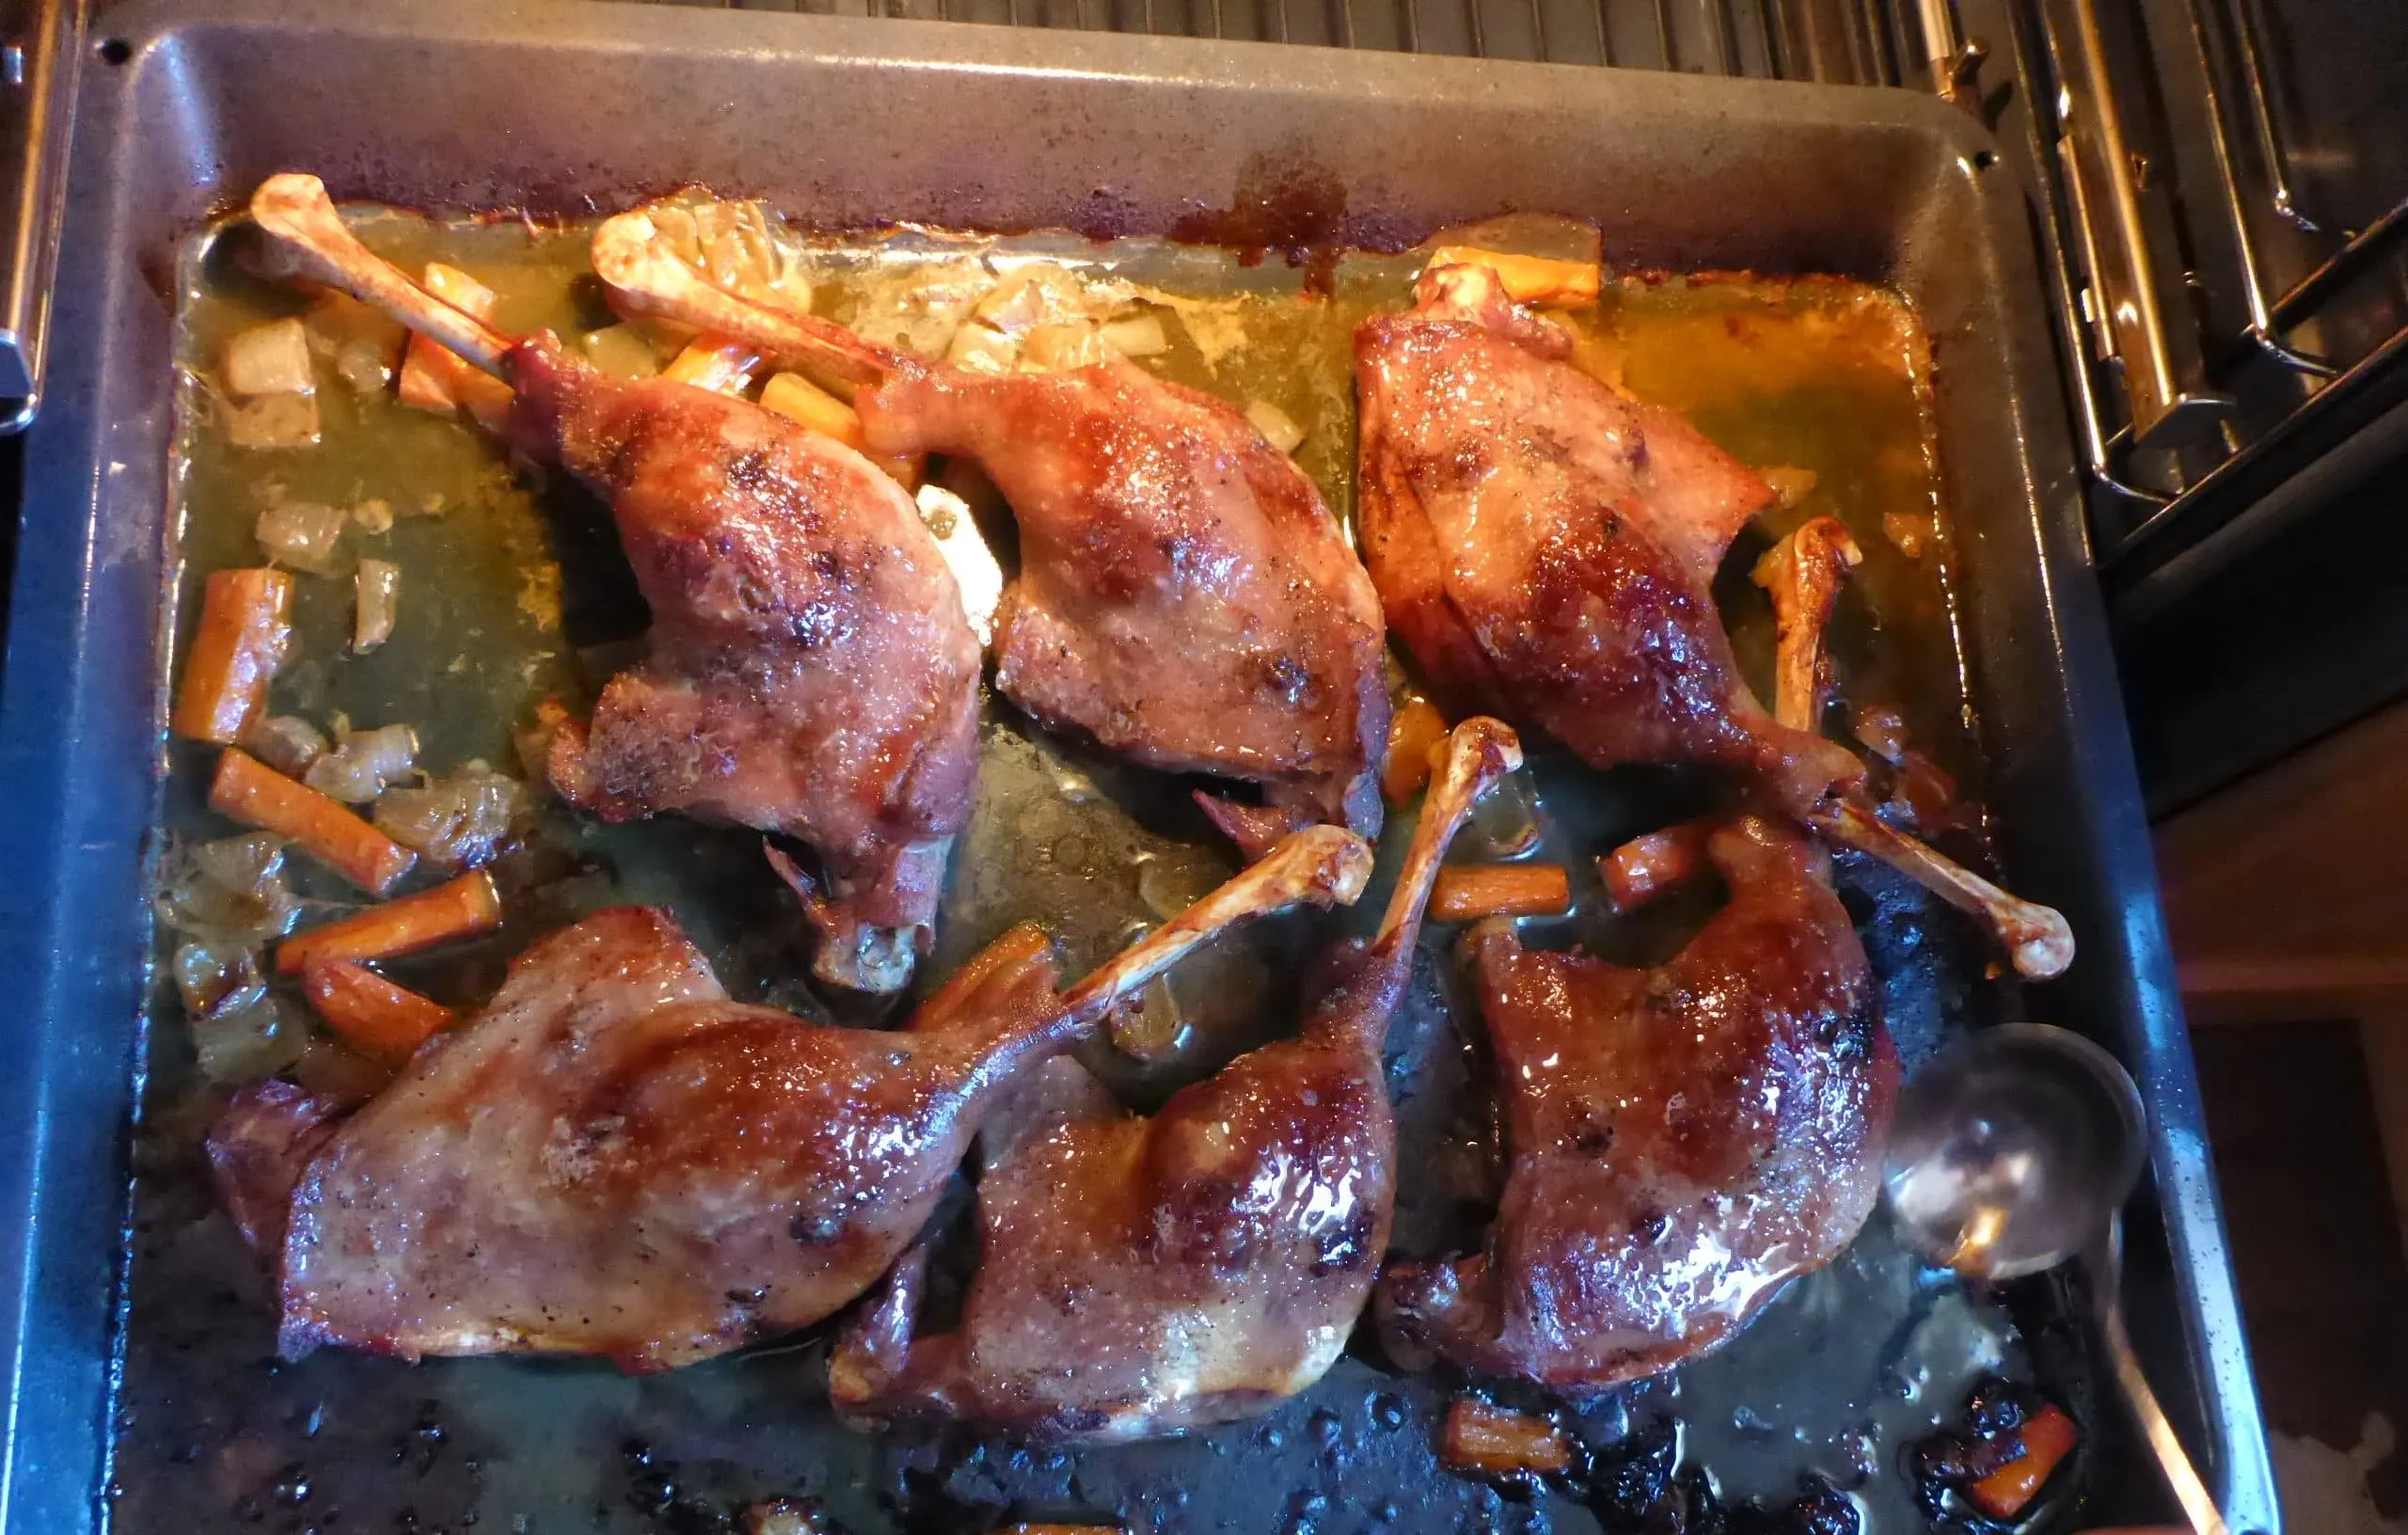 Goose legs undergoing the grilling process to achieve a wonderfully crispy skin.